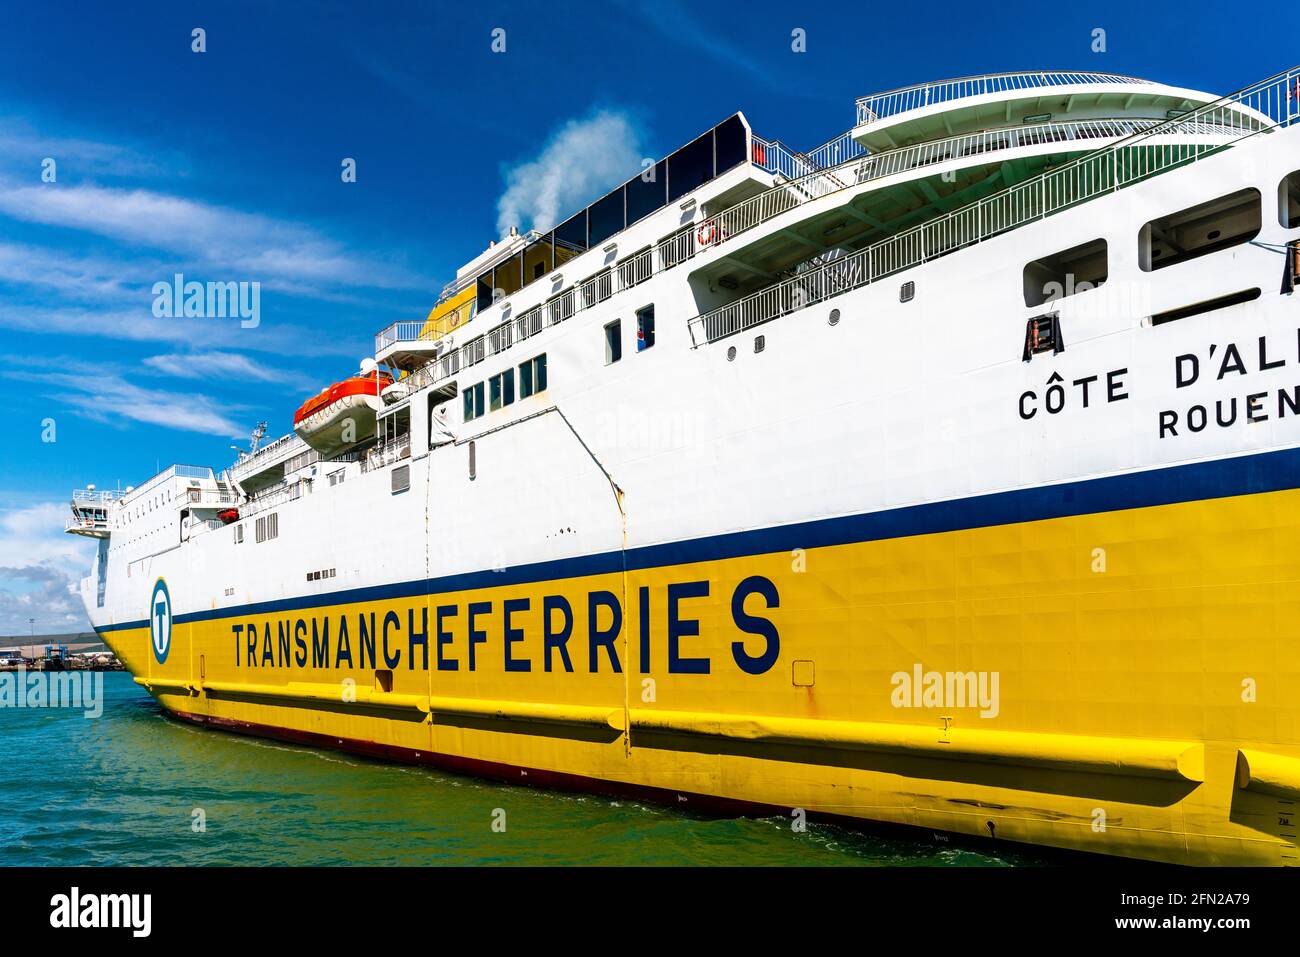 The Transmanche Newhaven - Dieppe Ferry Arrives At The Port Of Newhaven, East Sussex, UK. Stock Photo